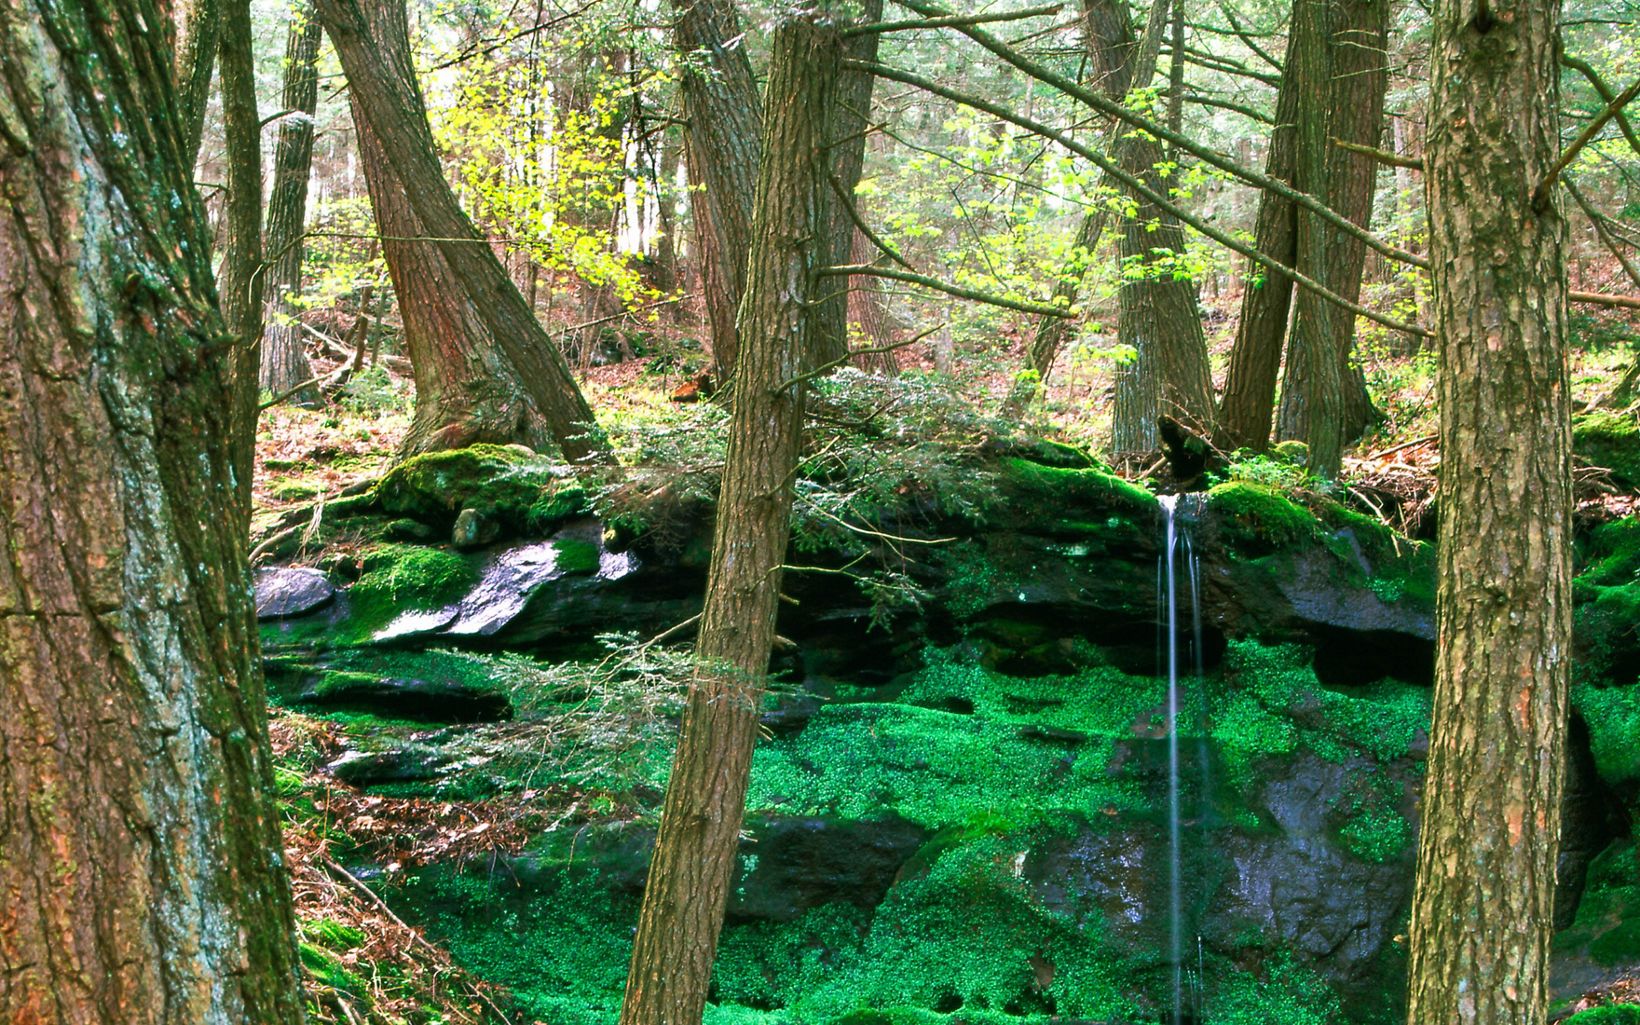 A mossy outcropping with a small waterfall in the woods.